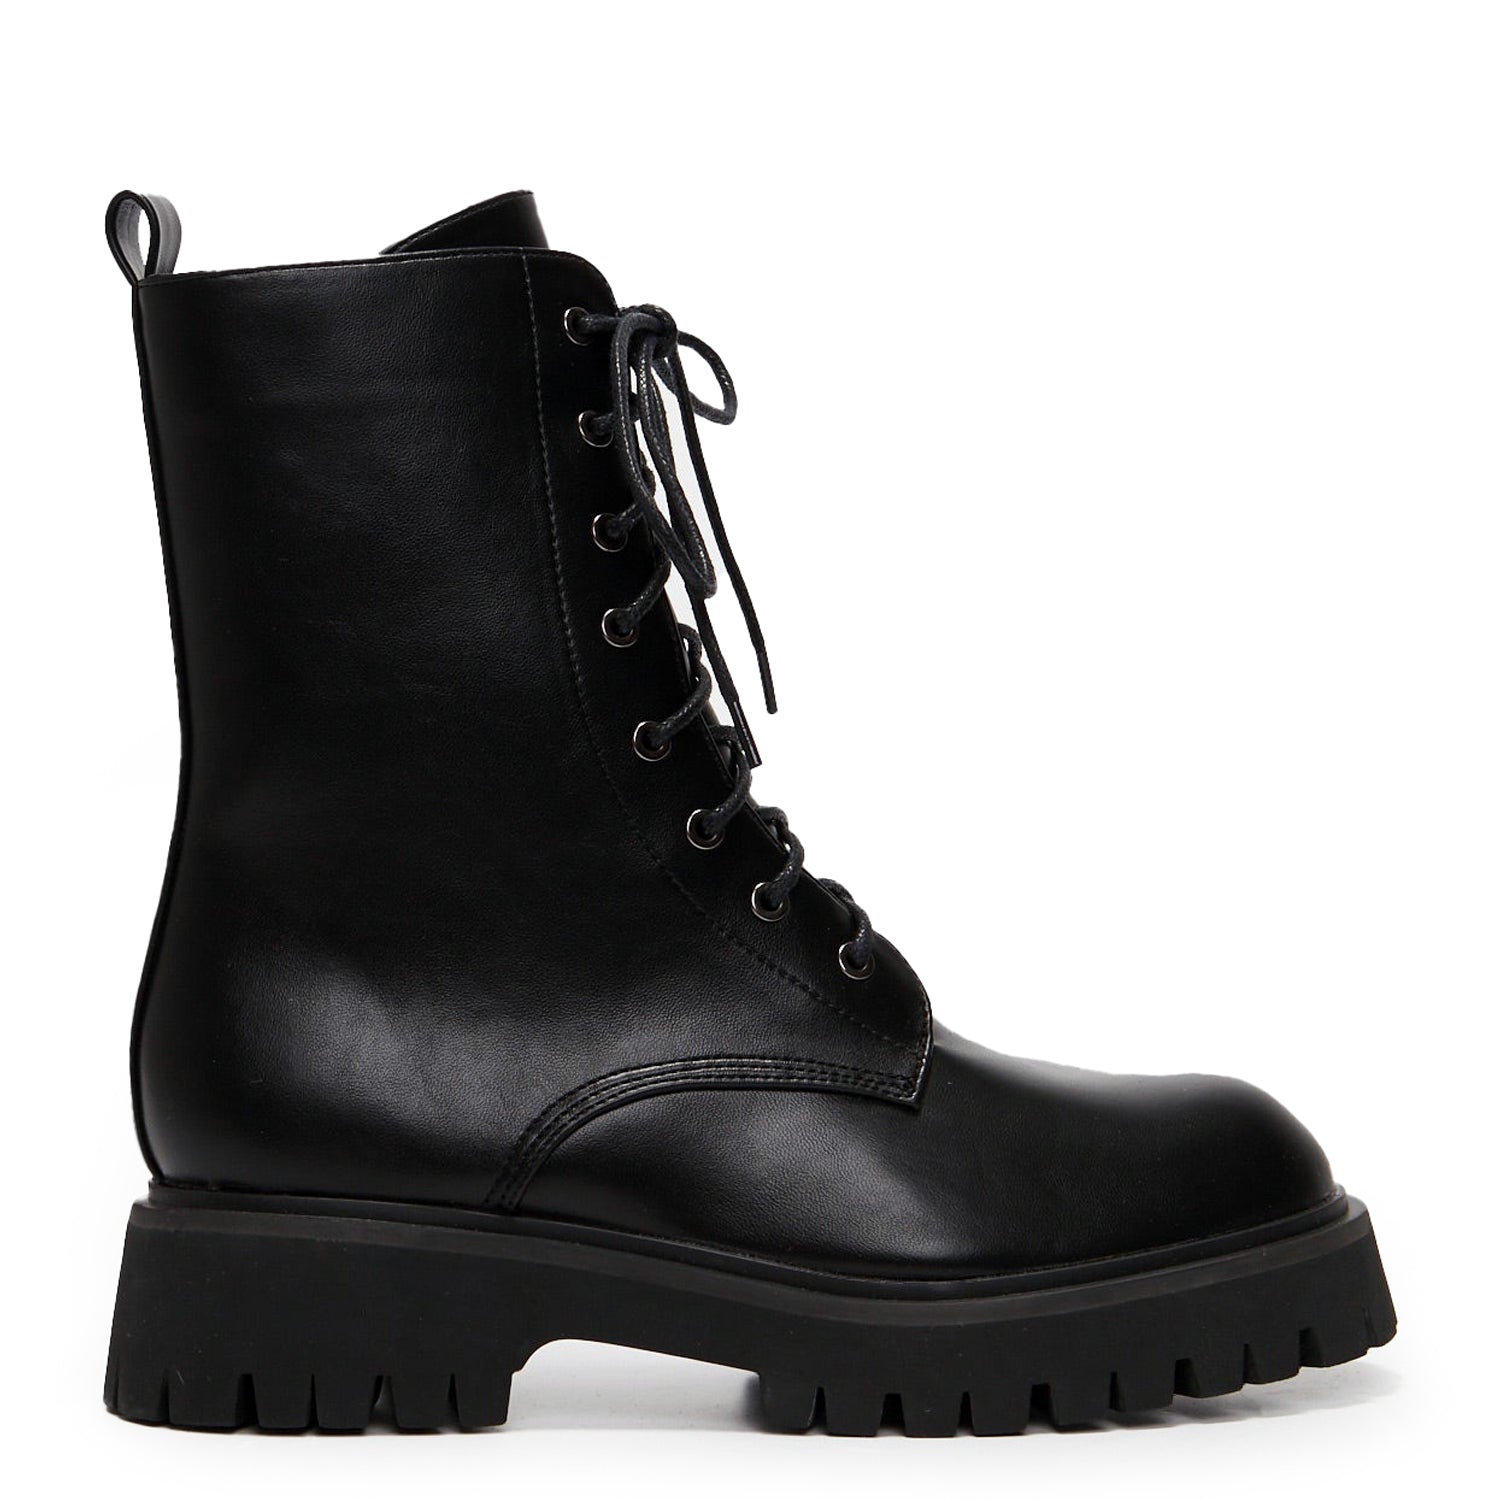 Anchor Black Military Lace Up Boots – KOI footwear